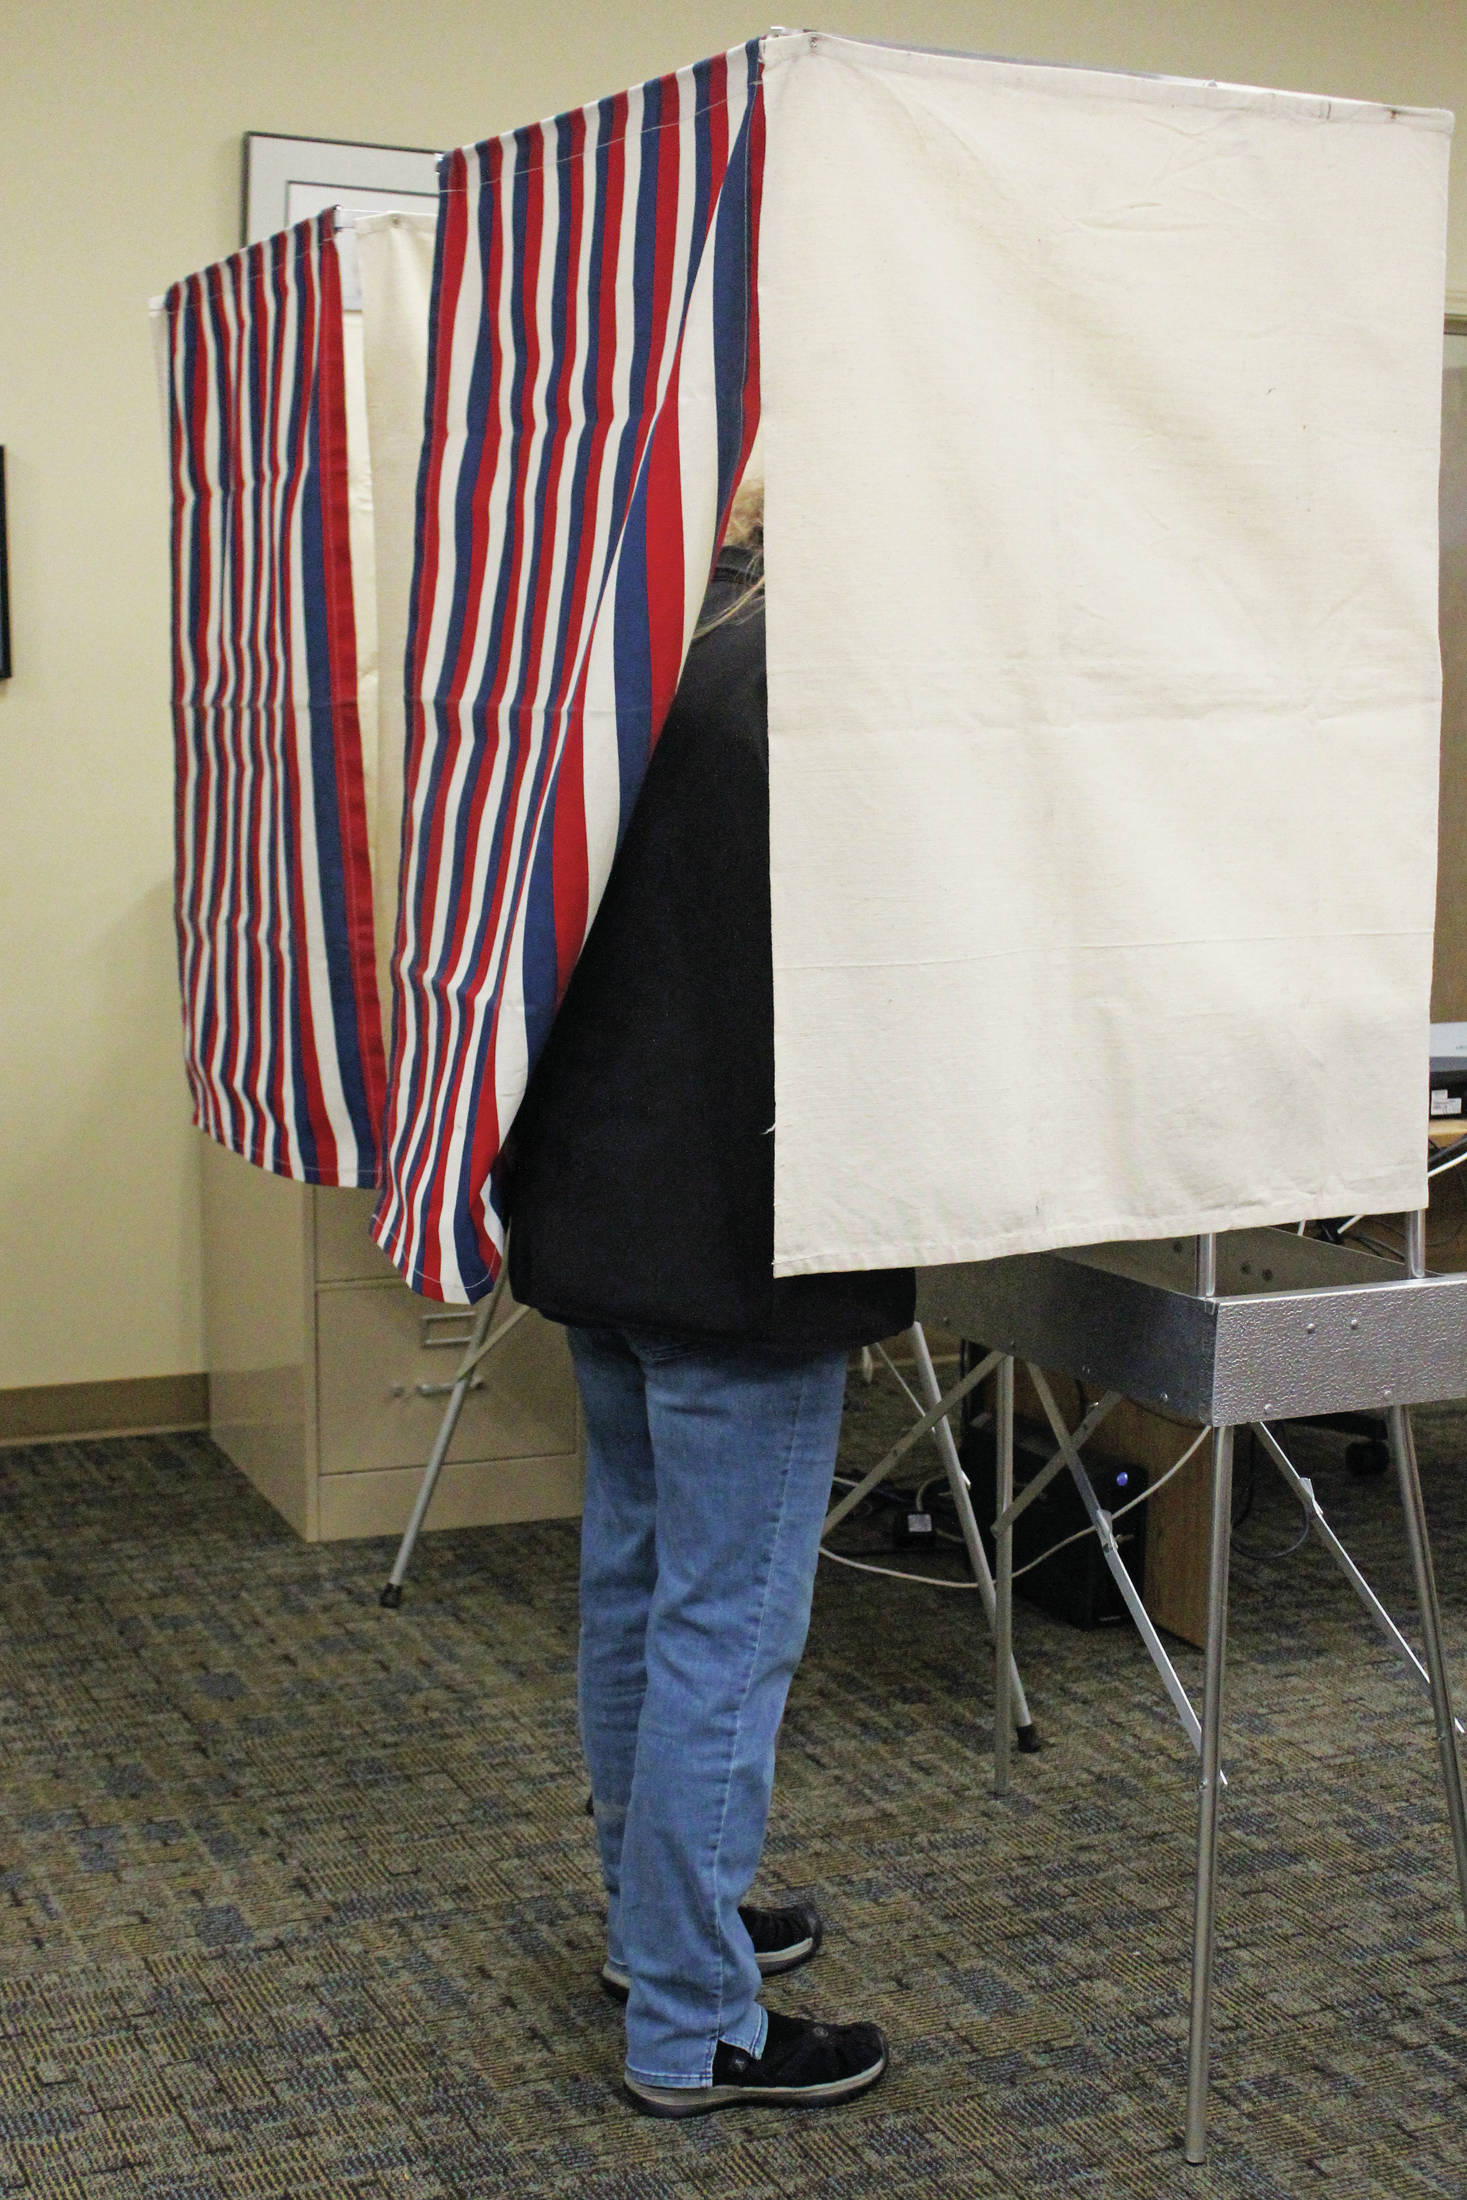 A Homer city resident casts their vote in the Tuesday, Oct. 1, 2019 municipal election at Homer City Hall in Homer, Alaska. (Photo by Megan Pacer/Homer News)